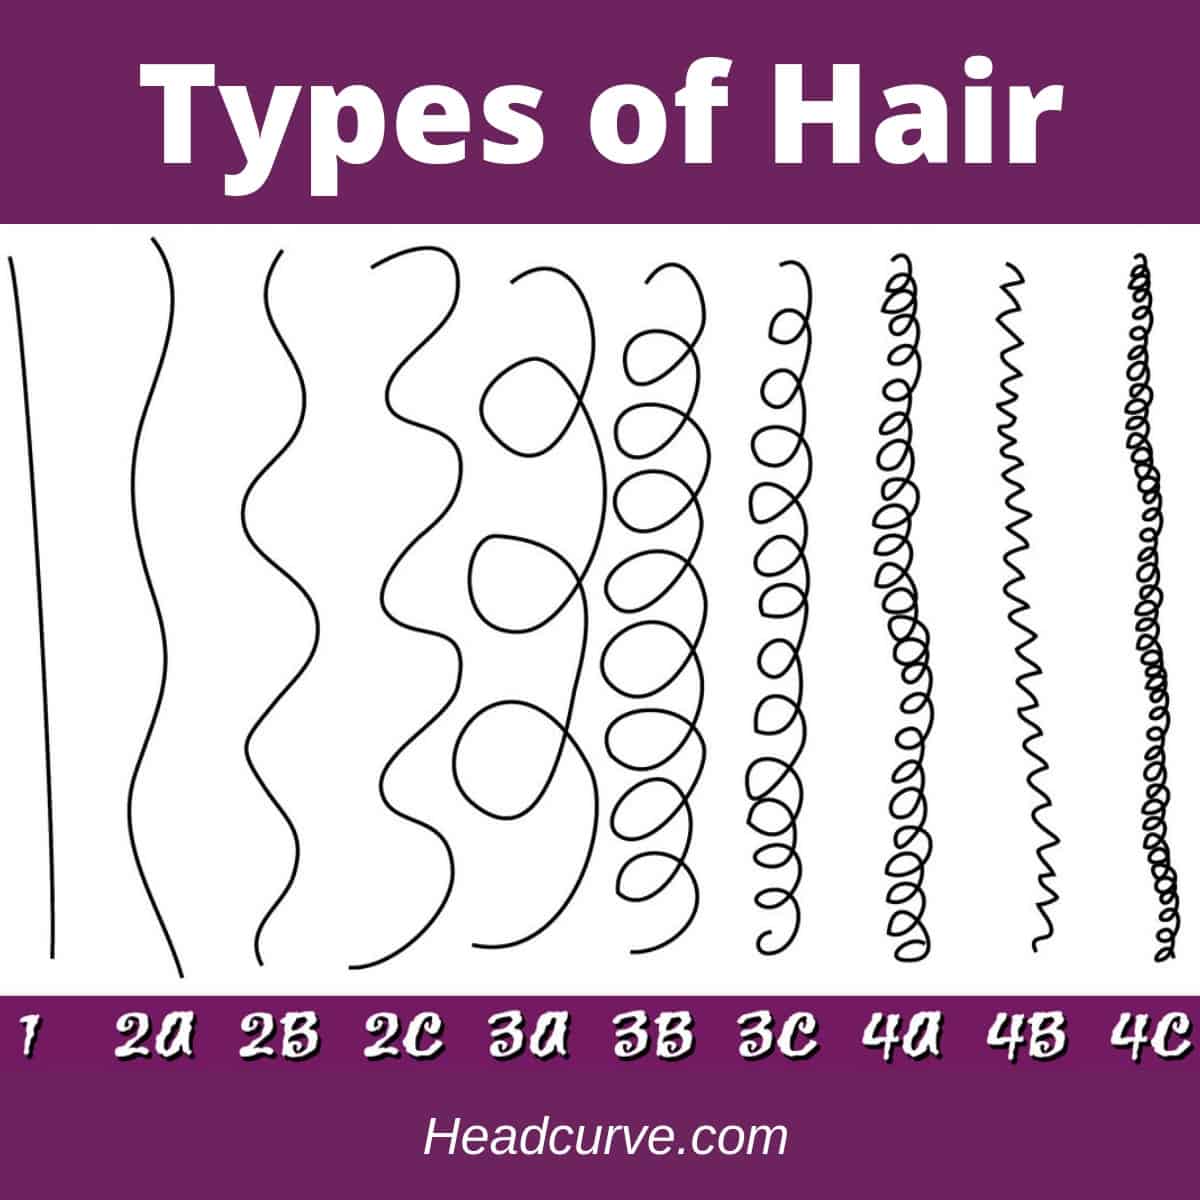 14 Types of Women's Hair - Do You Know Them All?